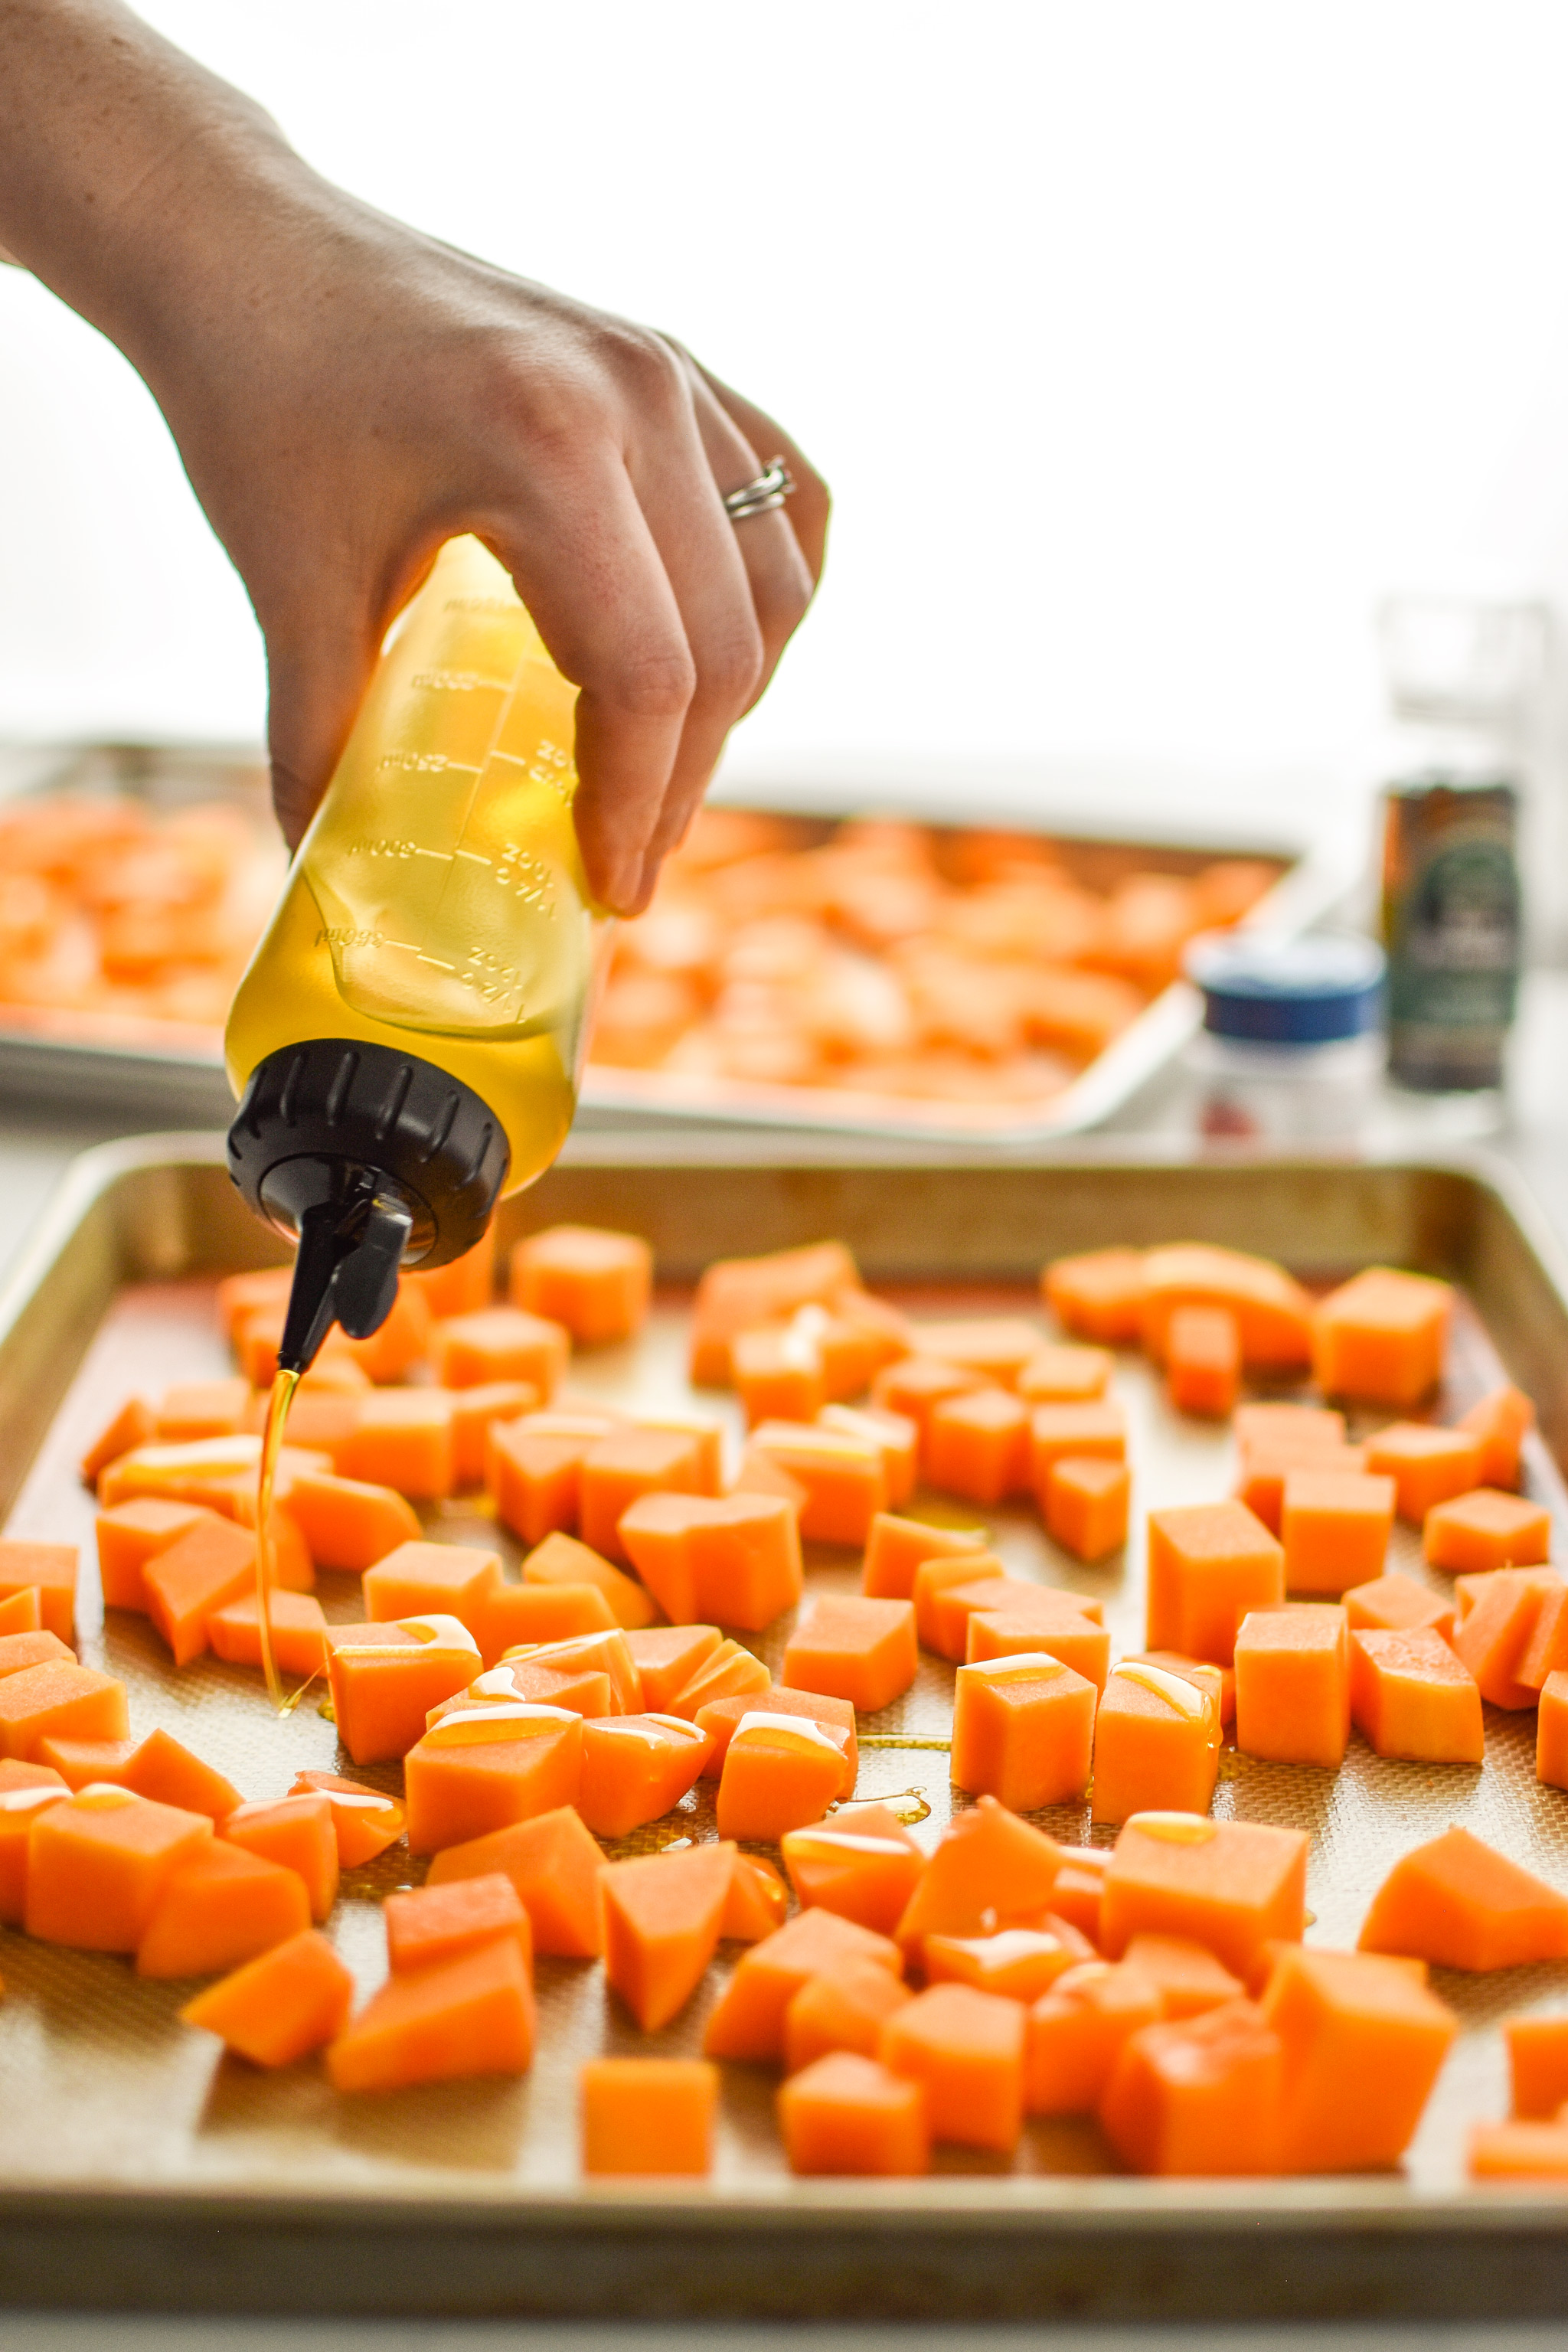 Using a chef squeeze bottle to add oil to the roasted butternut squash